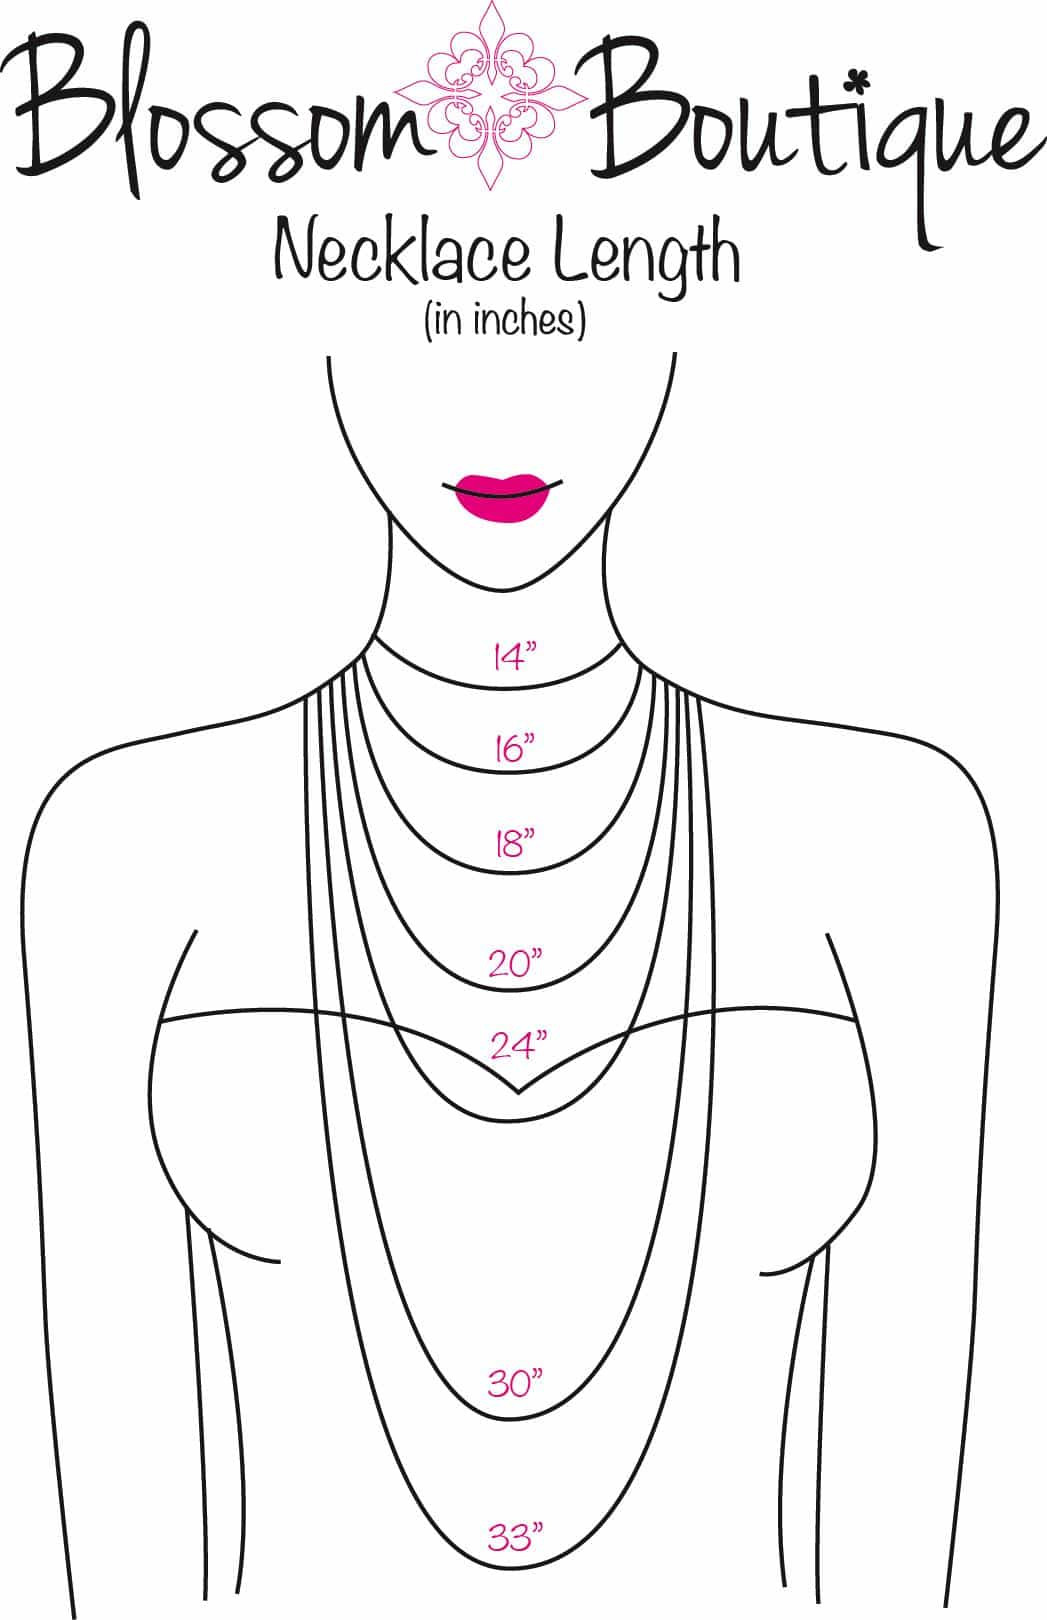 Necklace Lengths Chart
 Do you have a necklace length chart Evergreen